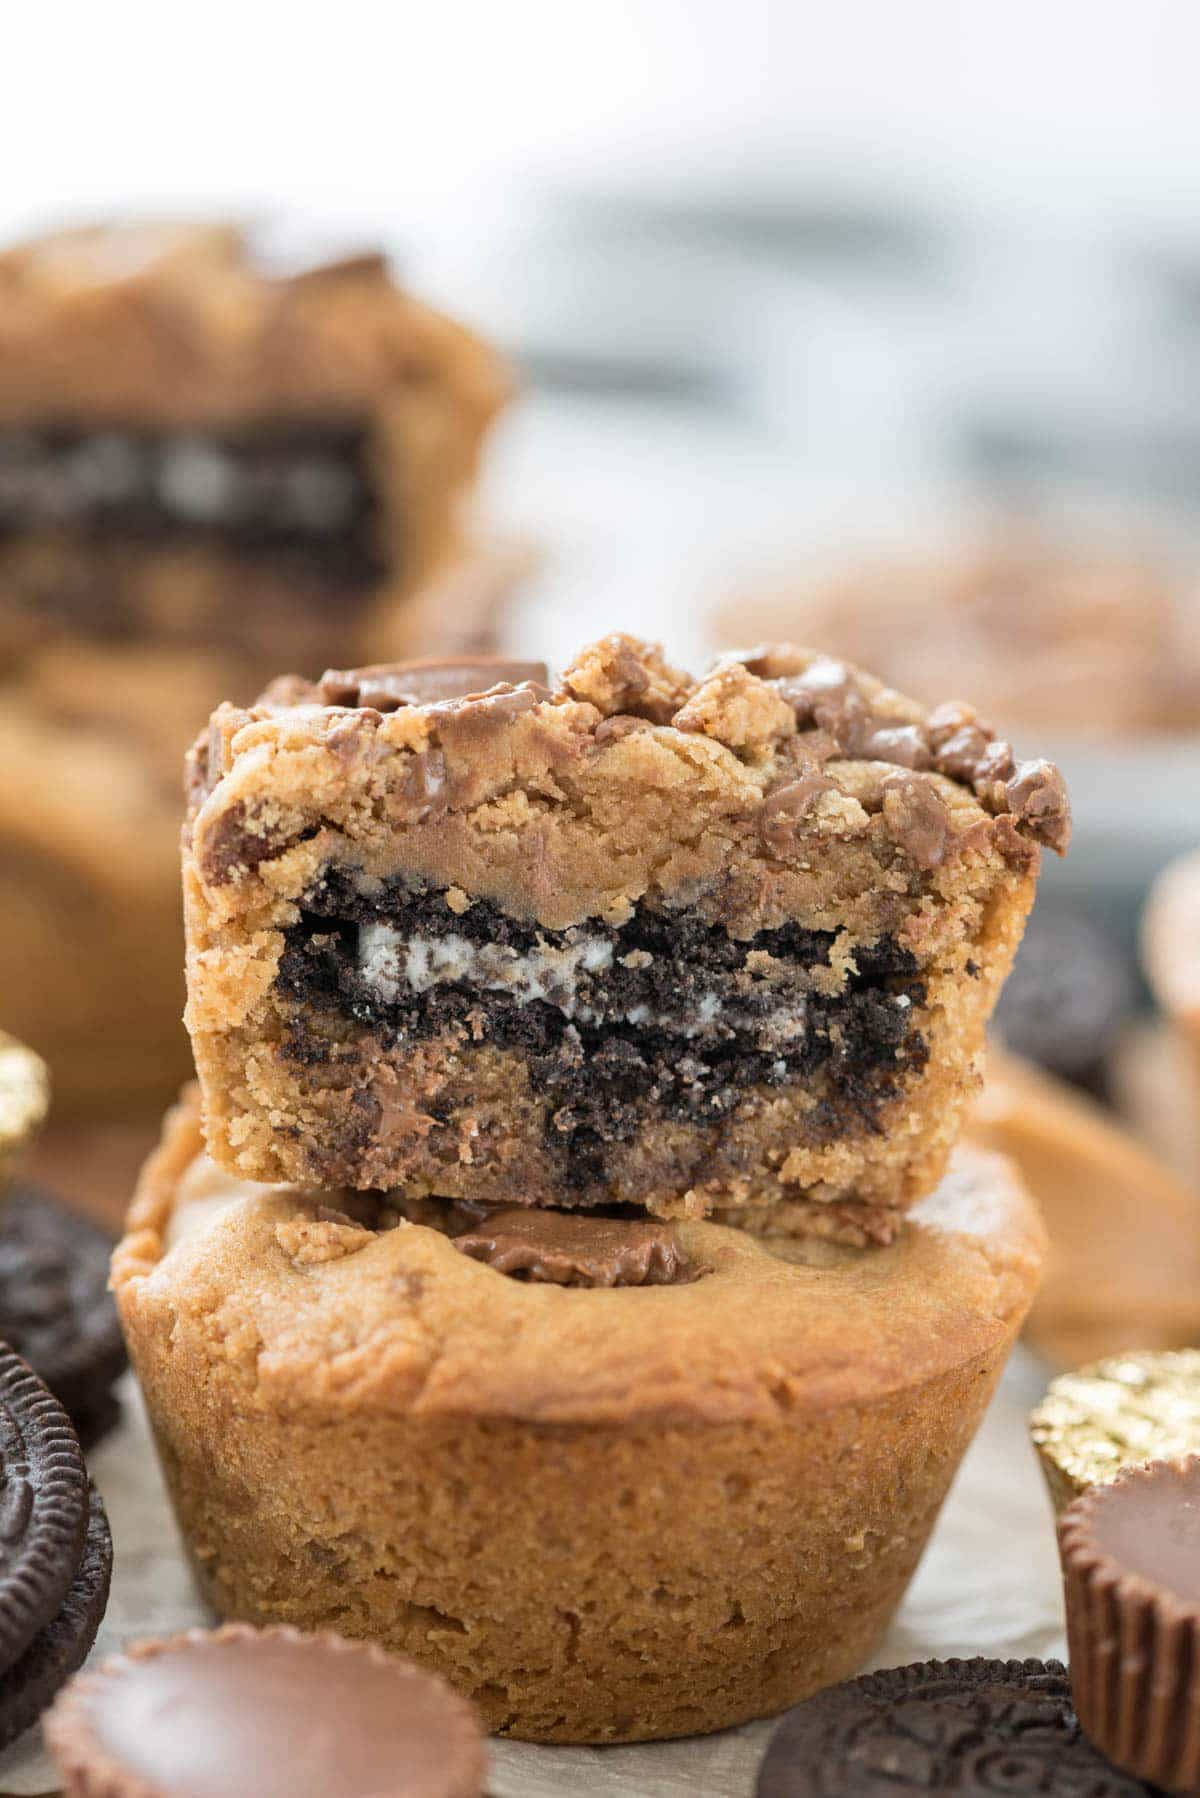 Extreme Oreo Stuffed Peanut Butter Cookies - easy cookies stuffed with OREOS and peanut butter cups!